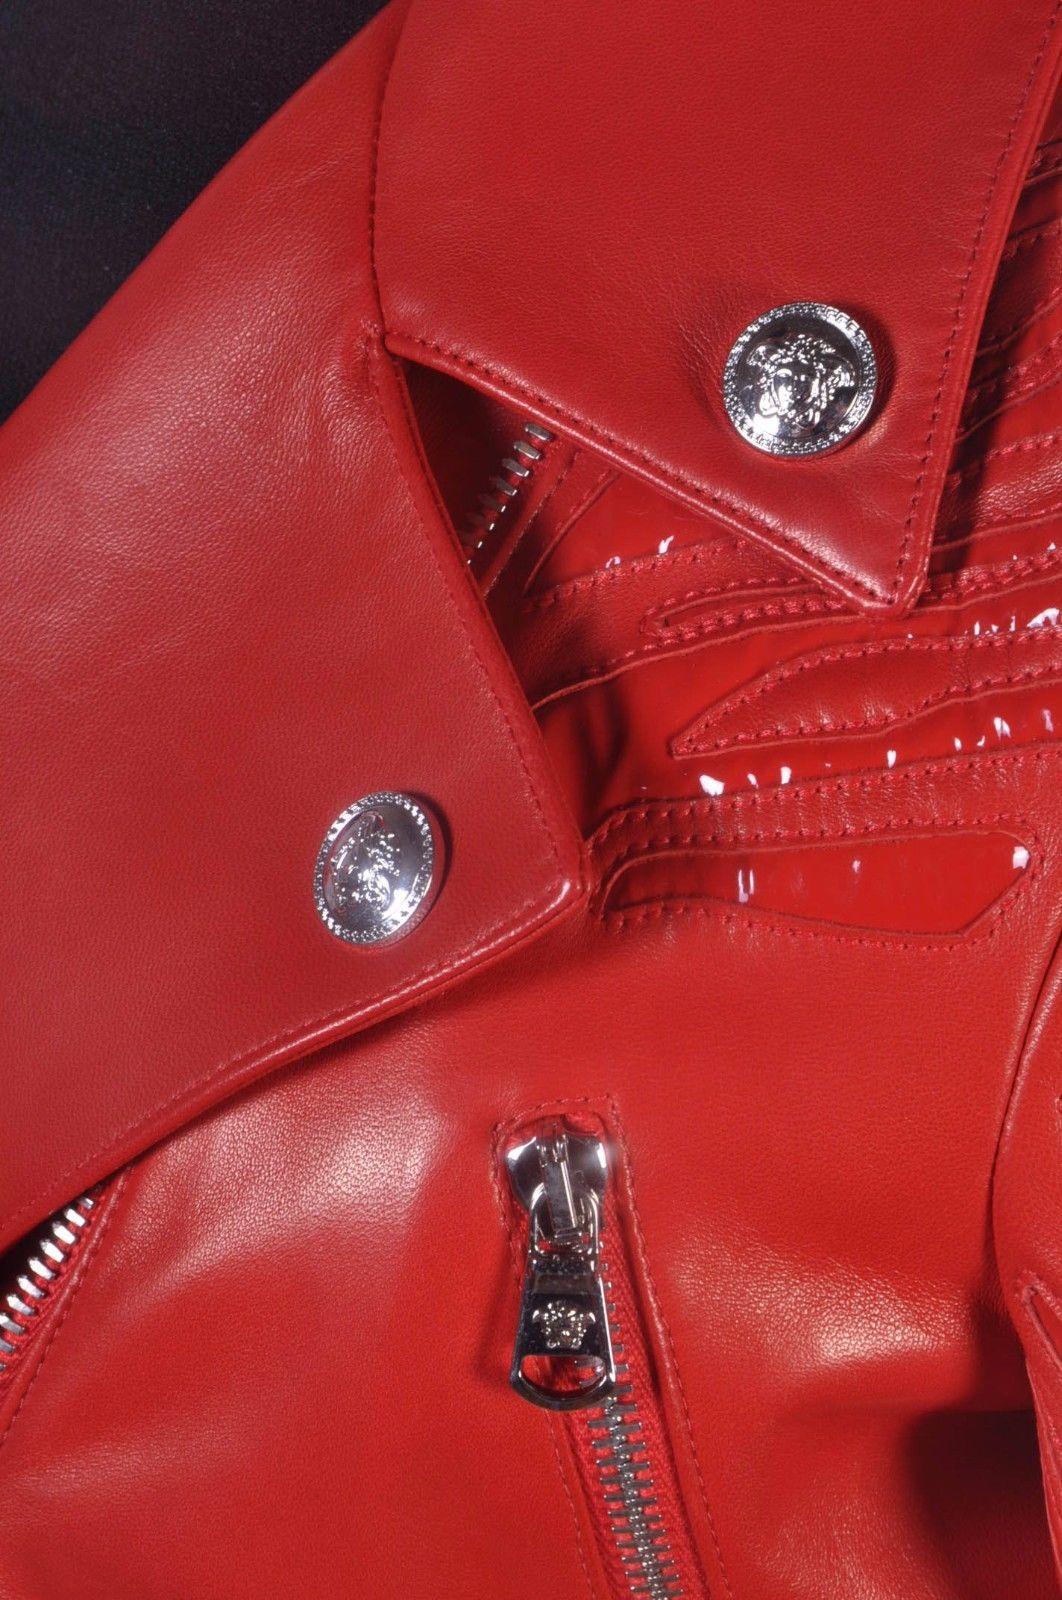 New VERSACE Red Leather Moto Jacket With Vinyl Animal Stripes For Sale 1